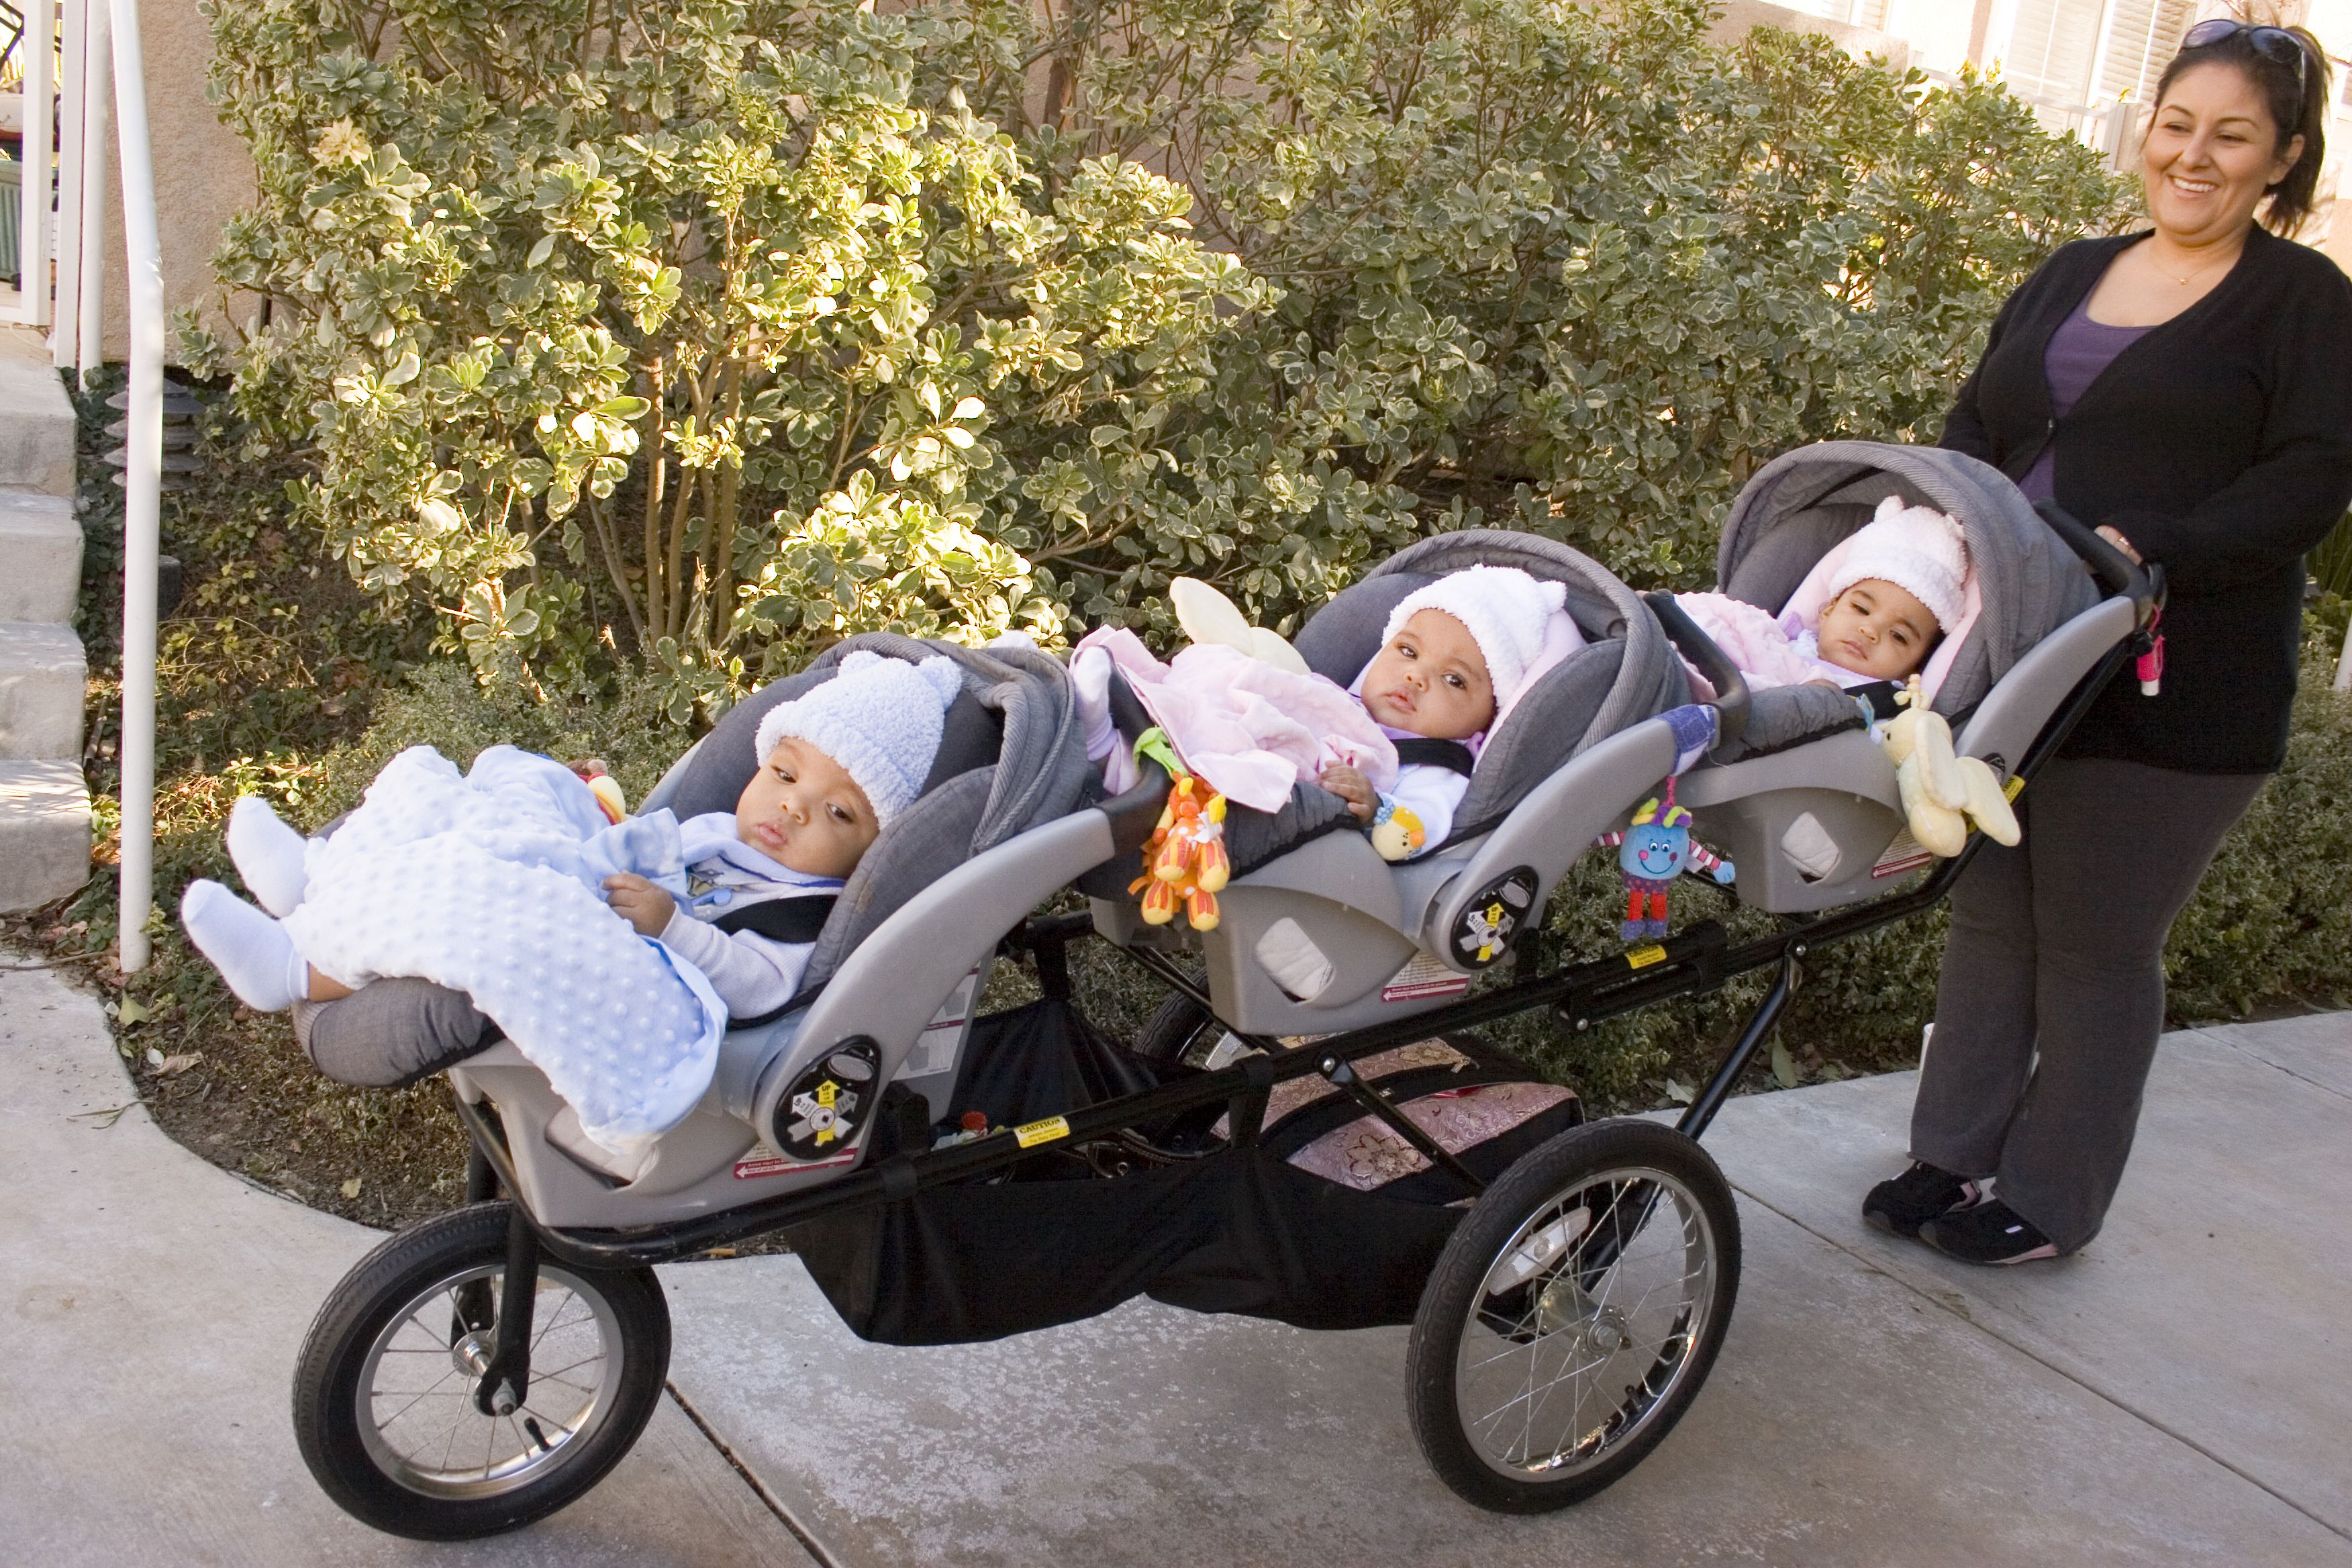 woman holding triplet stroller with baby car seats